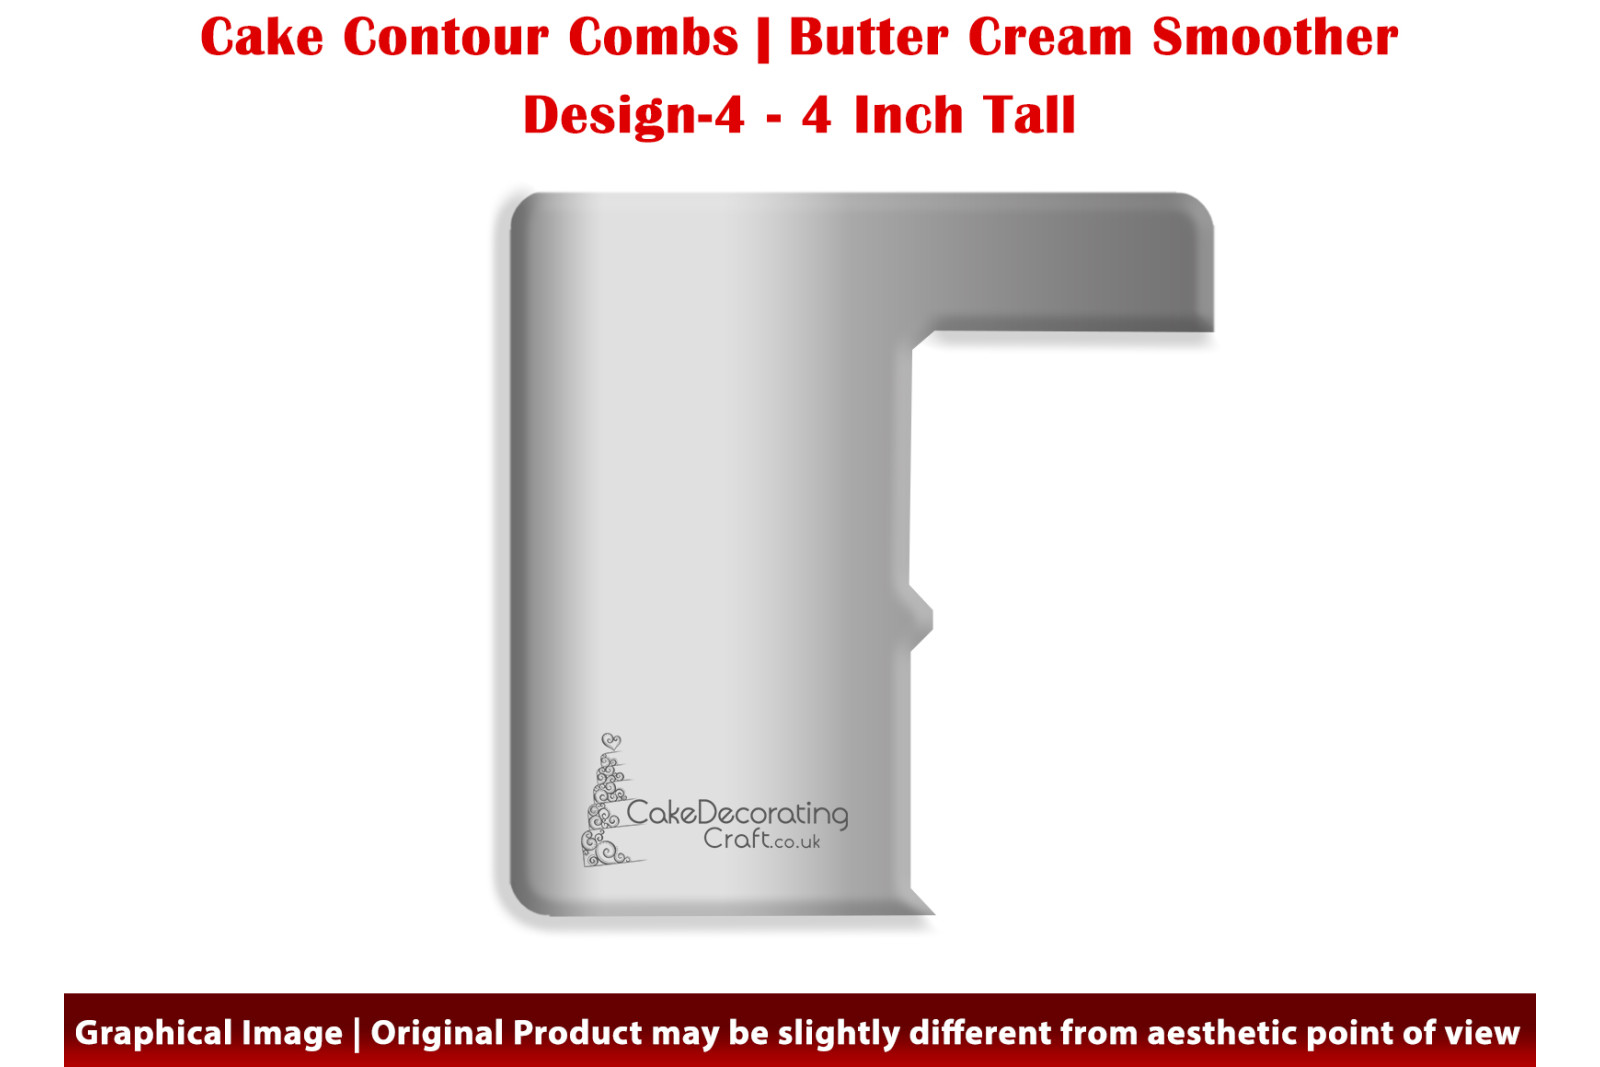 Book | 4 Inch | Cake Decorating Craft | Cake Contour Combs | Smoothing | Metal Spreader | Butter Cream Smoothing | Genius Tool